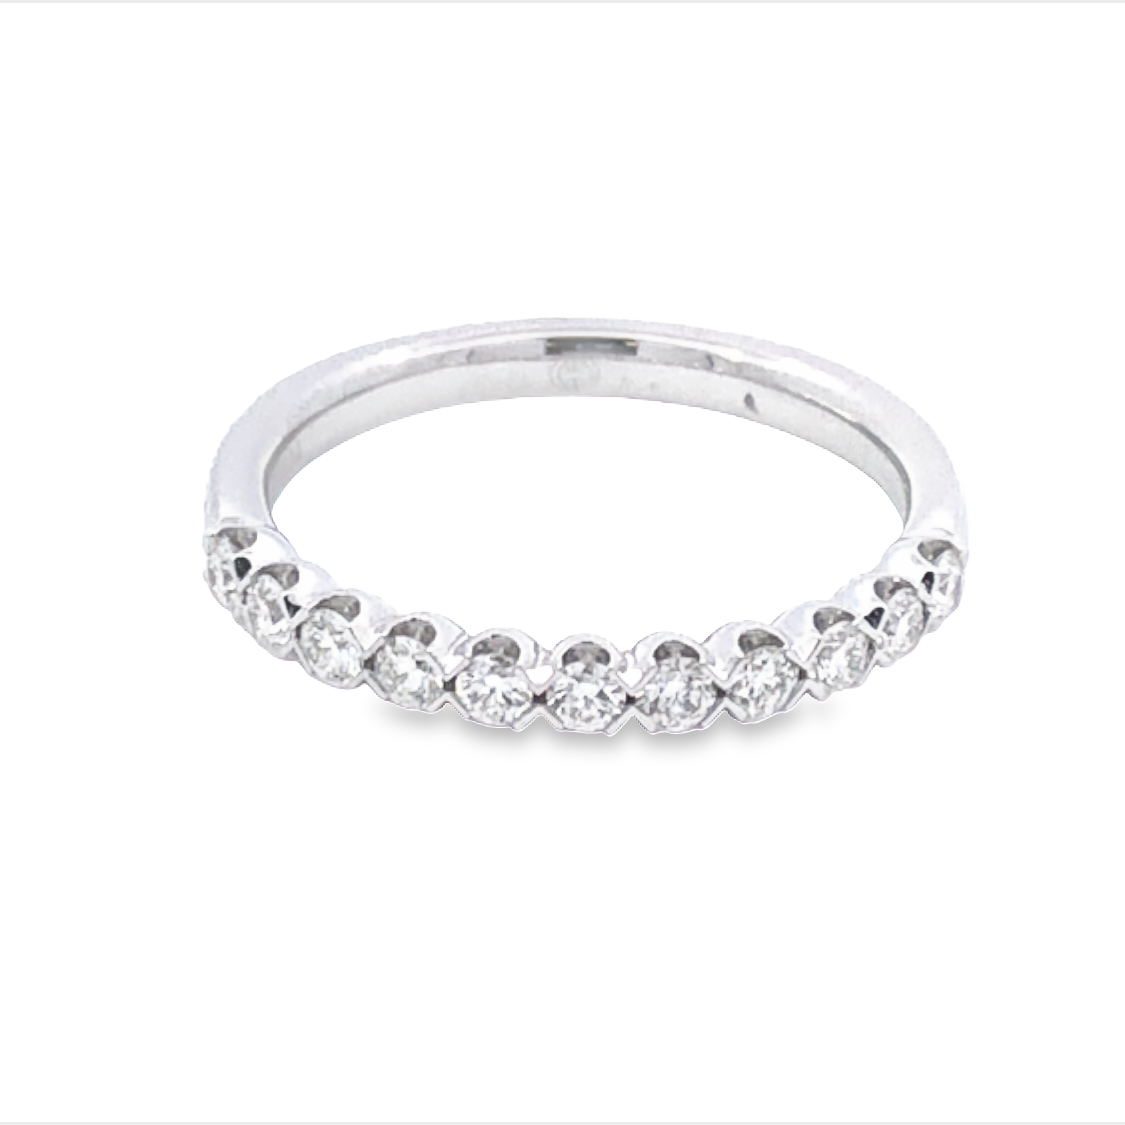 Christopher Designs 14K White Gold Anniversary Band with 11 Round Diamonds 0.37 Tcw G SI2